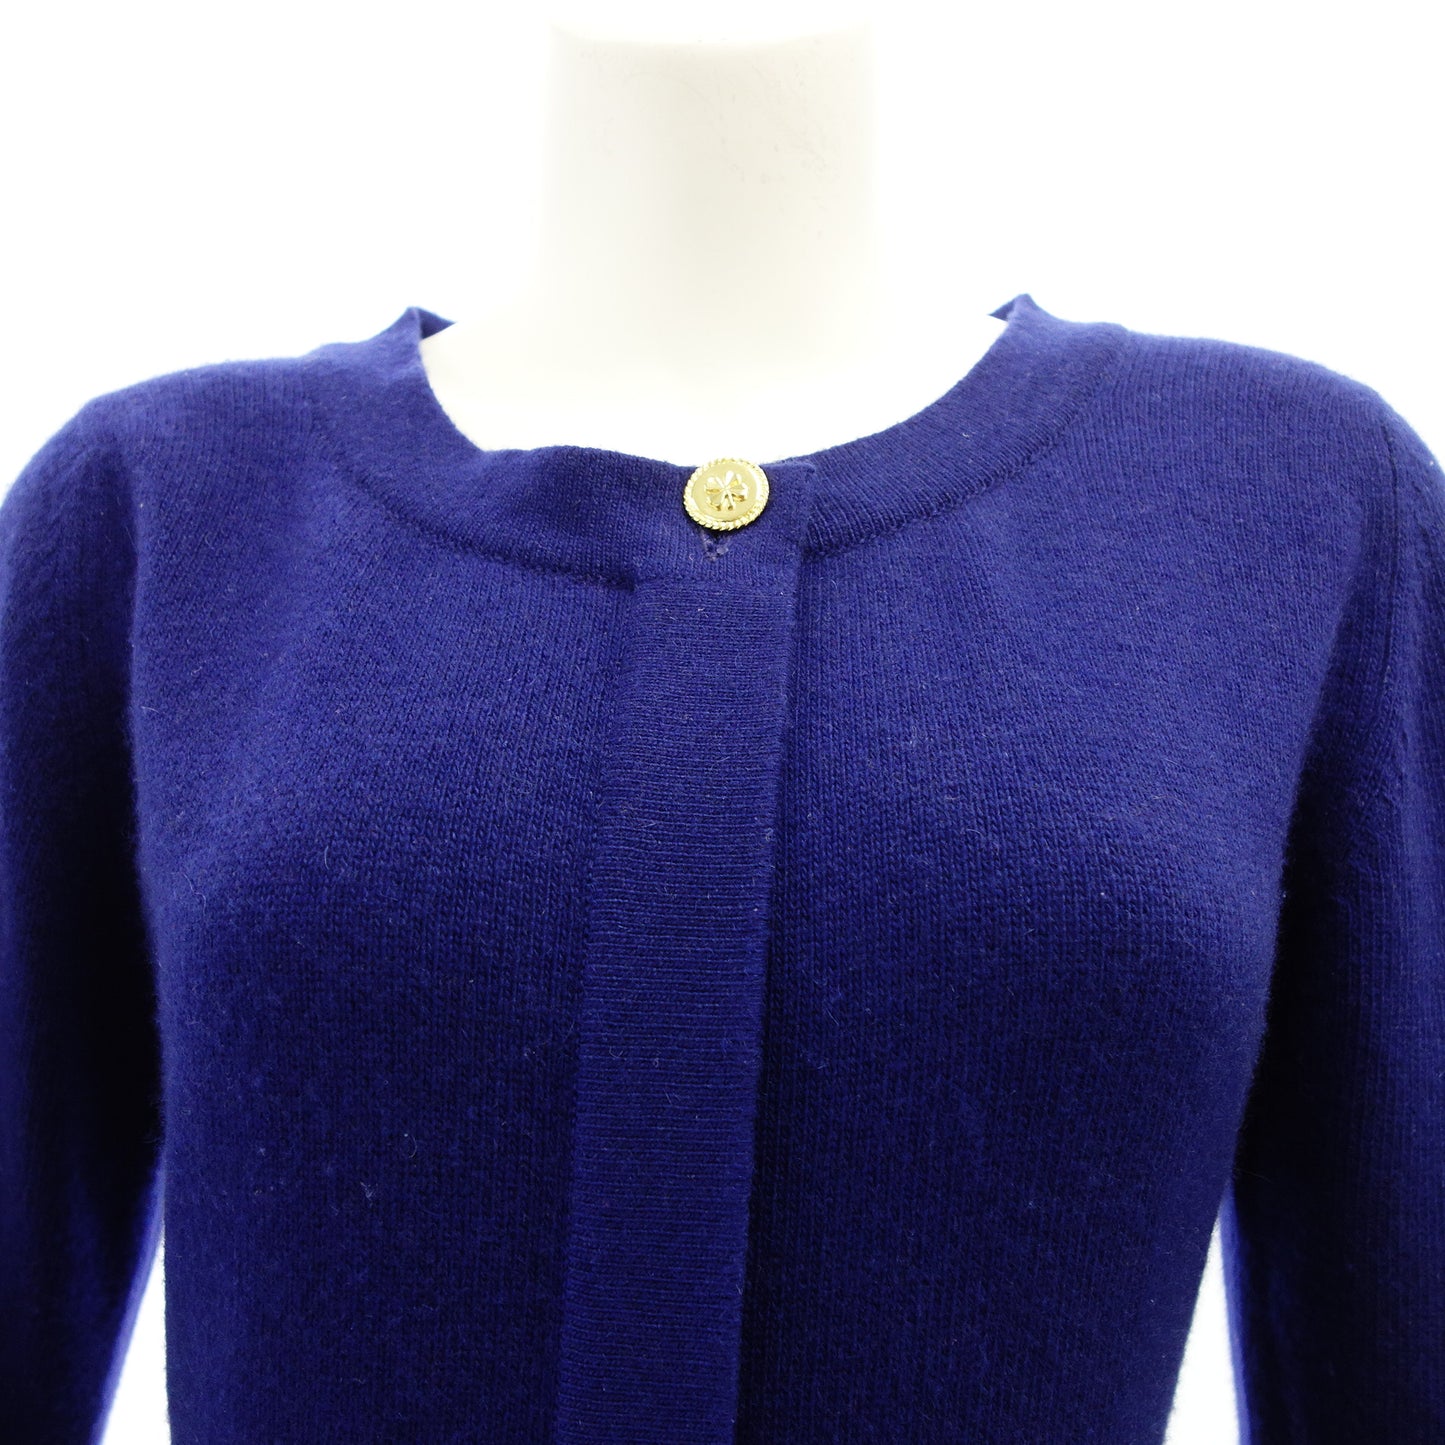 Good Condition◆CHANEL Knit Dress Clover Button Cashmere 100 Women's Blue Size 0 CHANEL [AFB18] 